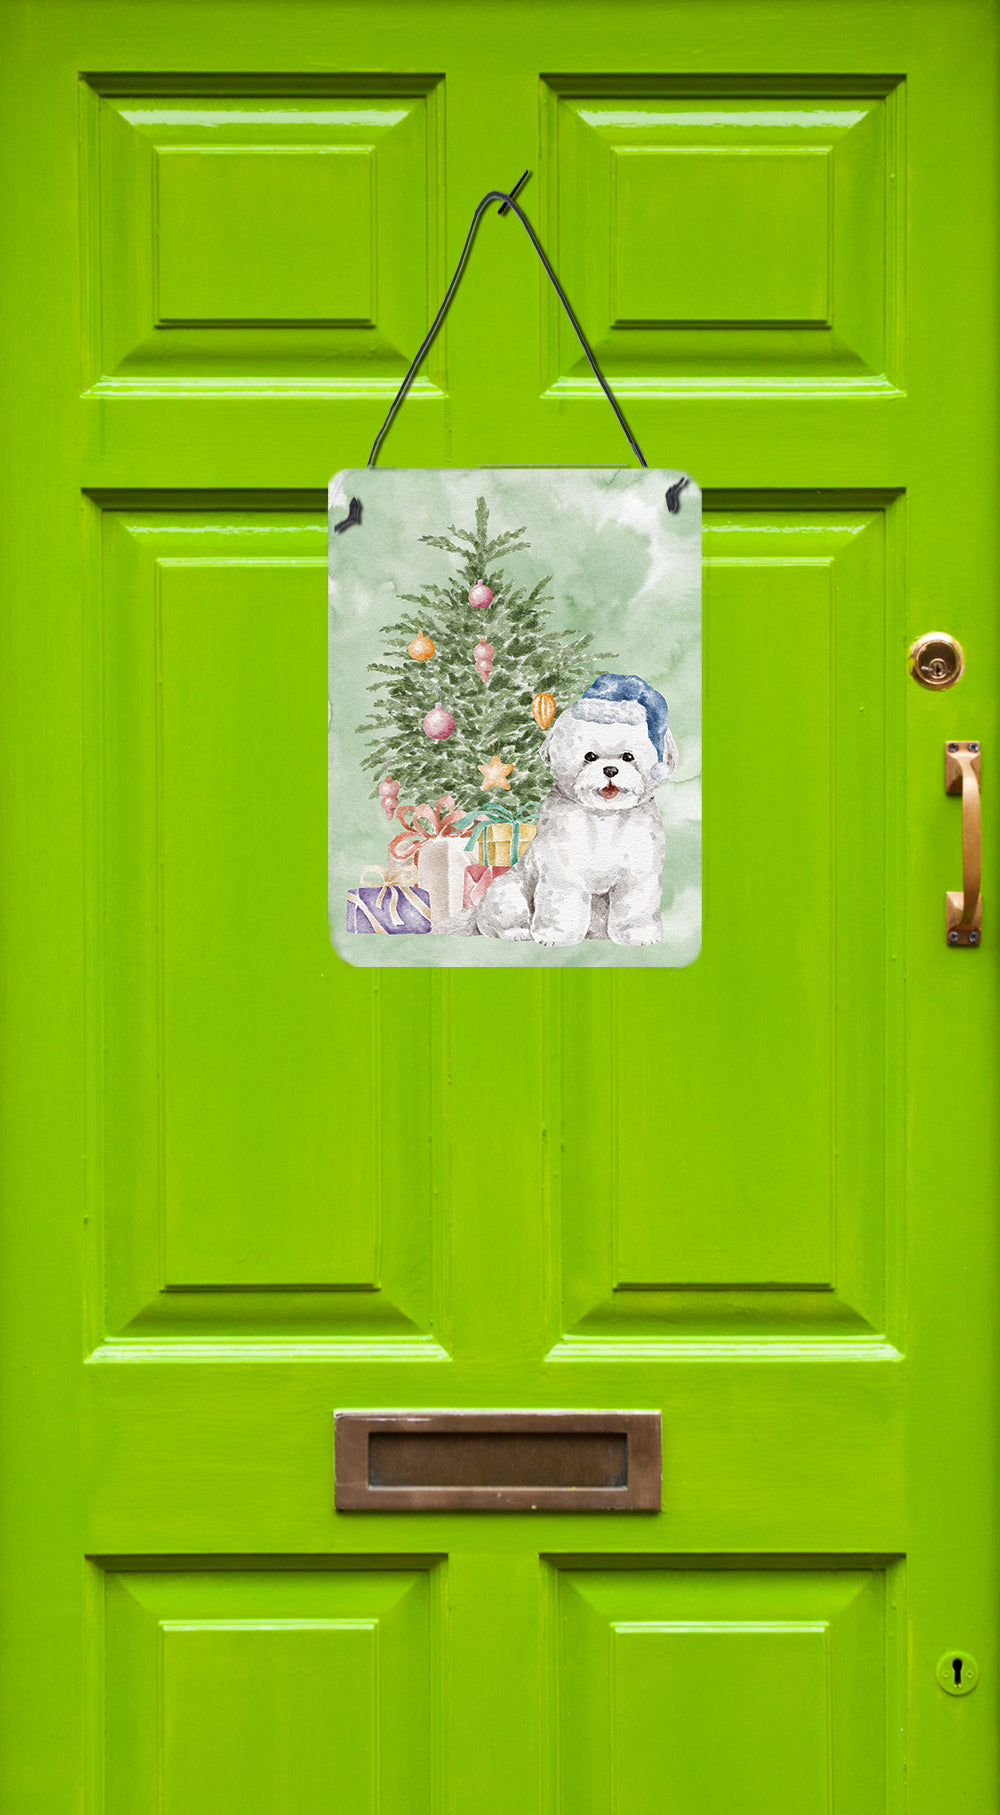 Buy this Christmas Bichon Frise Blue Hat Wall or Door Hanging Prints